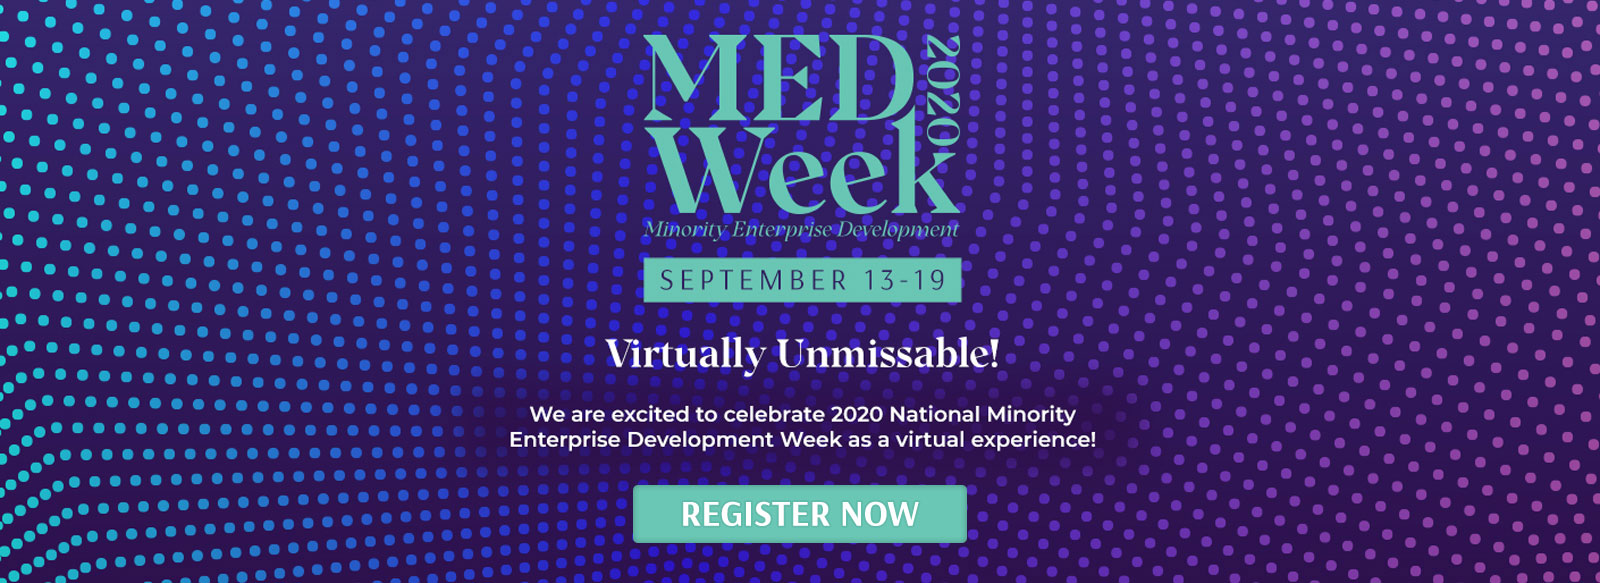 MED Week 2020 September 13 -19 Virtually Unmissable! We are excited to celebrate 2020 National Minority Enterprise Development Week as a virtual experience! Register Now